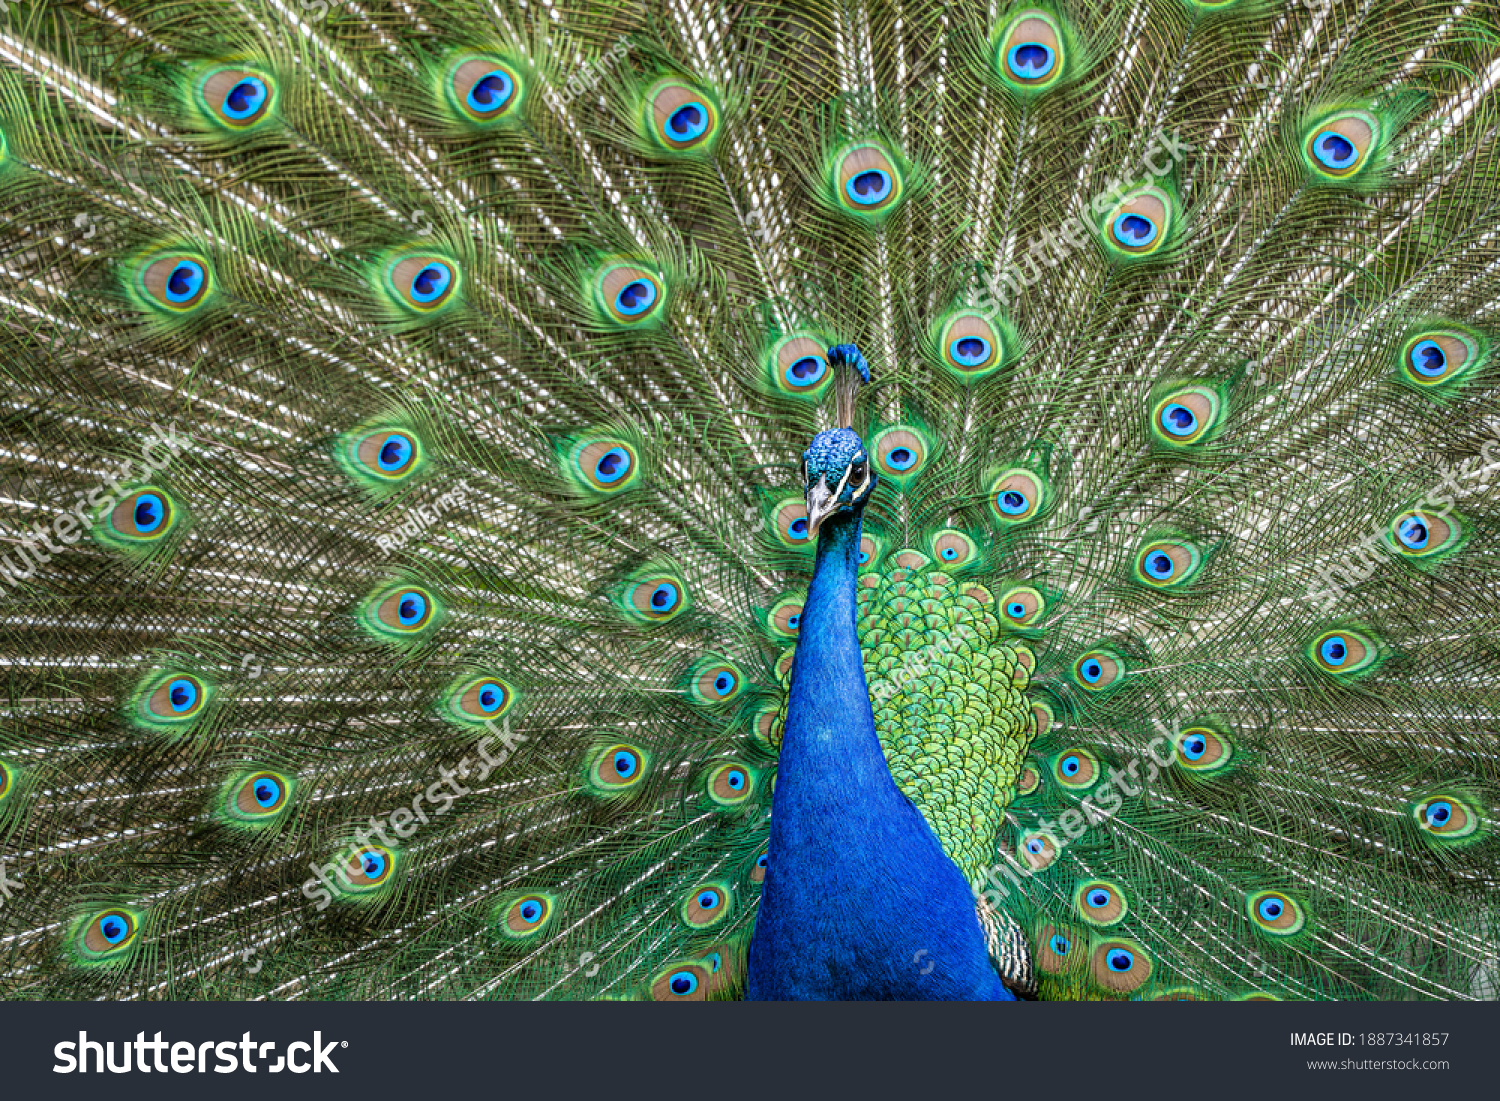 The Indian peafowl or blue peafowl, Pavo cristatus is a large and brightly coloured bird, is a species of peafowl native to South Asia, but introduced in many other parts of the world. #1887341857